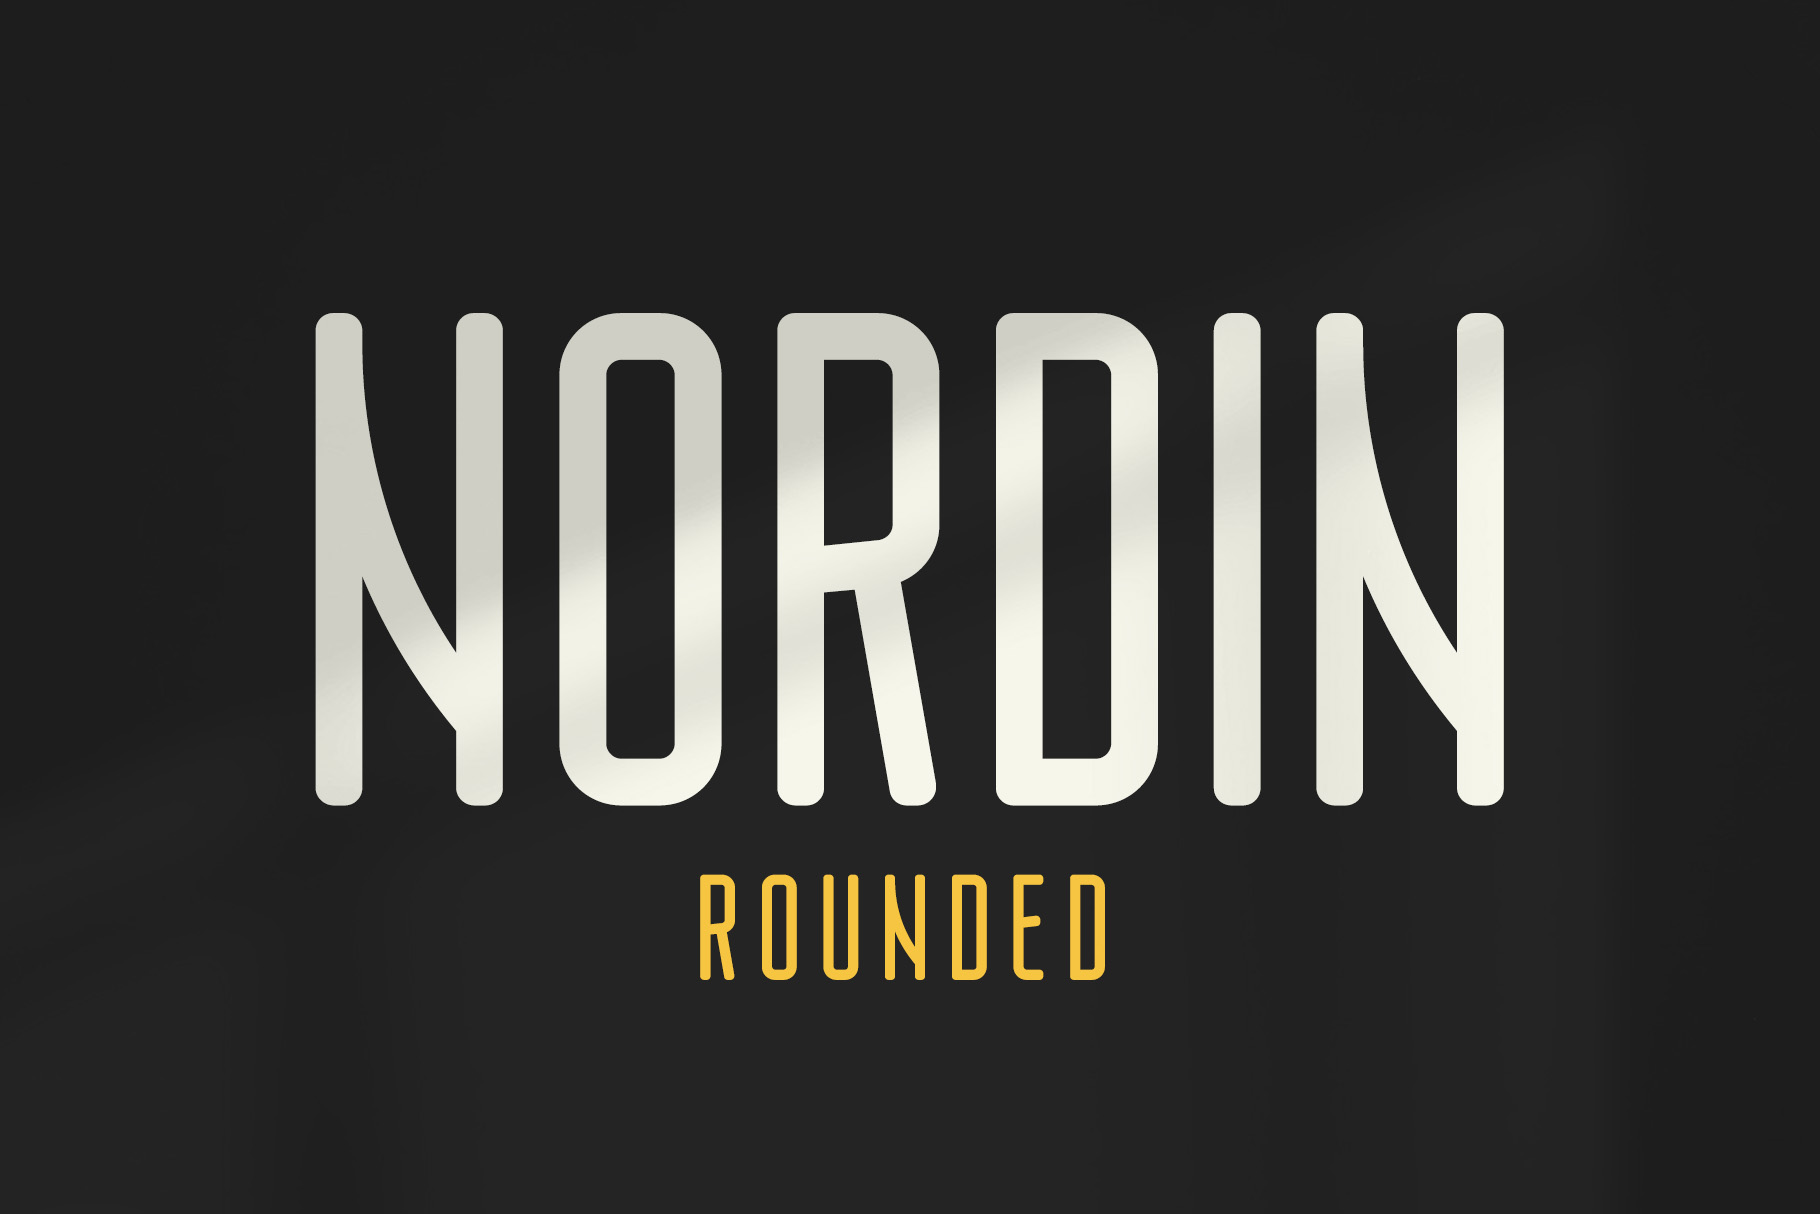 Nordin Rounded Free